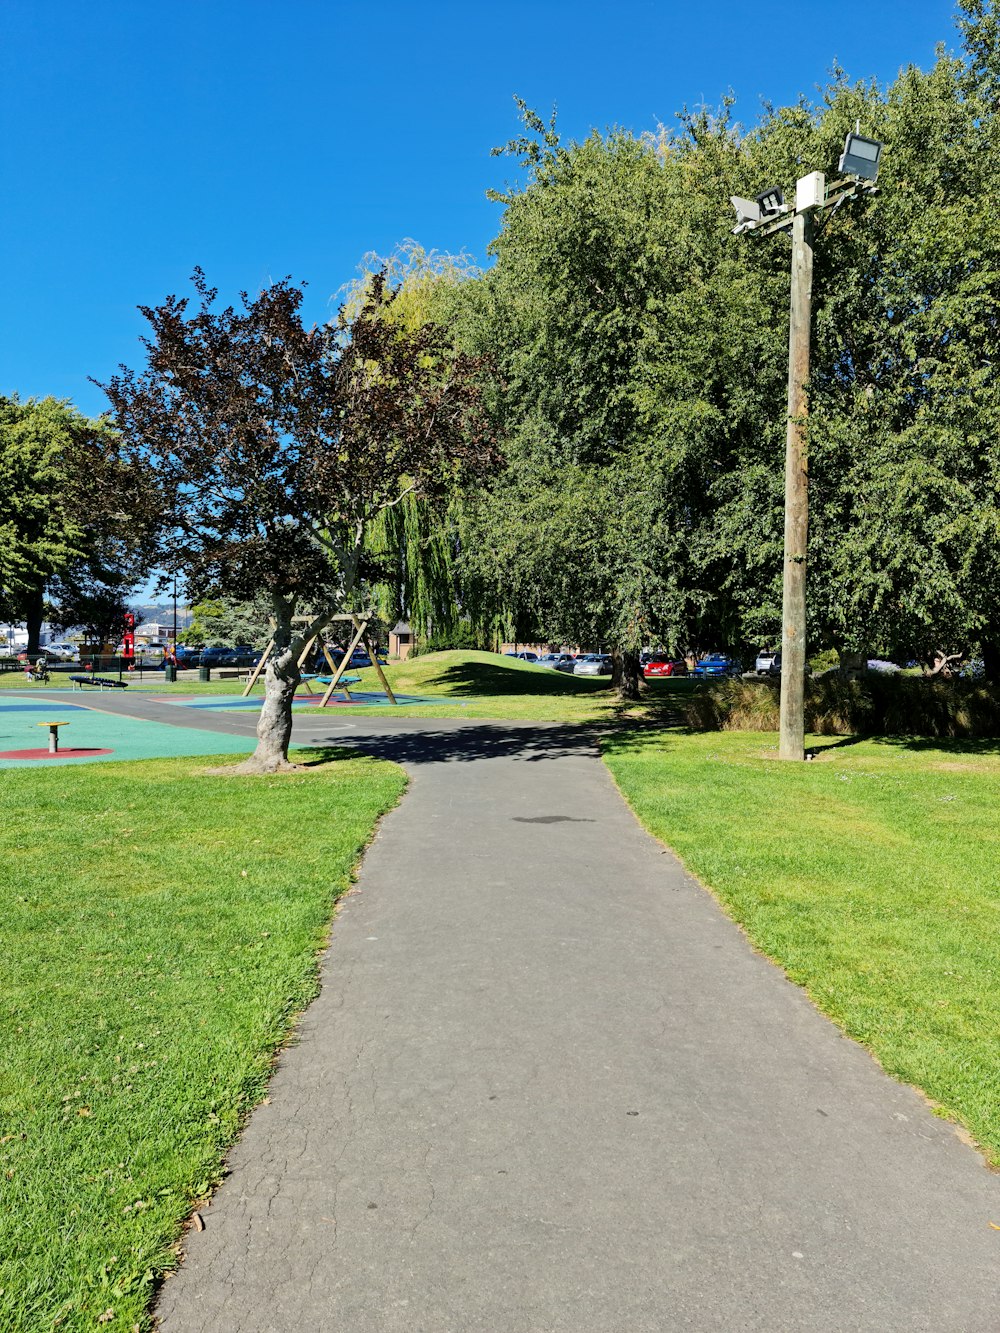 a paved path in a park with a playground in the background